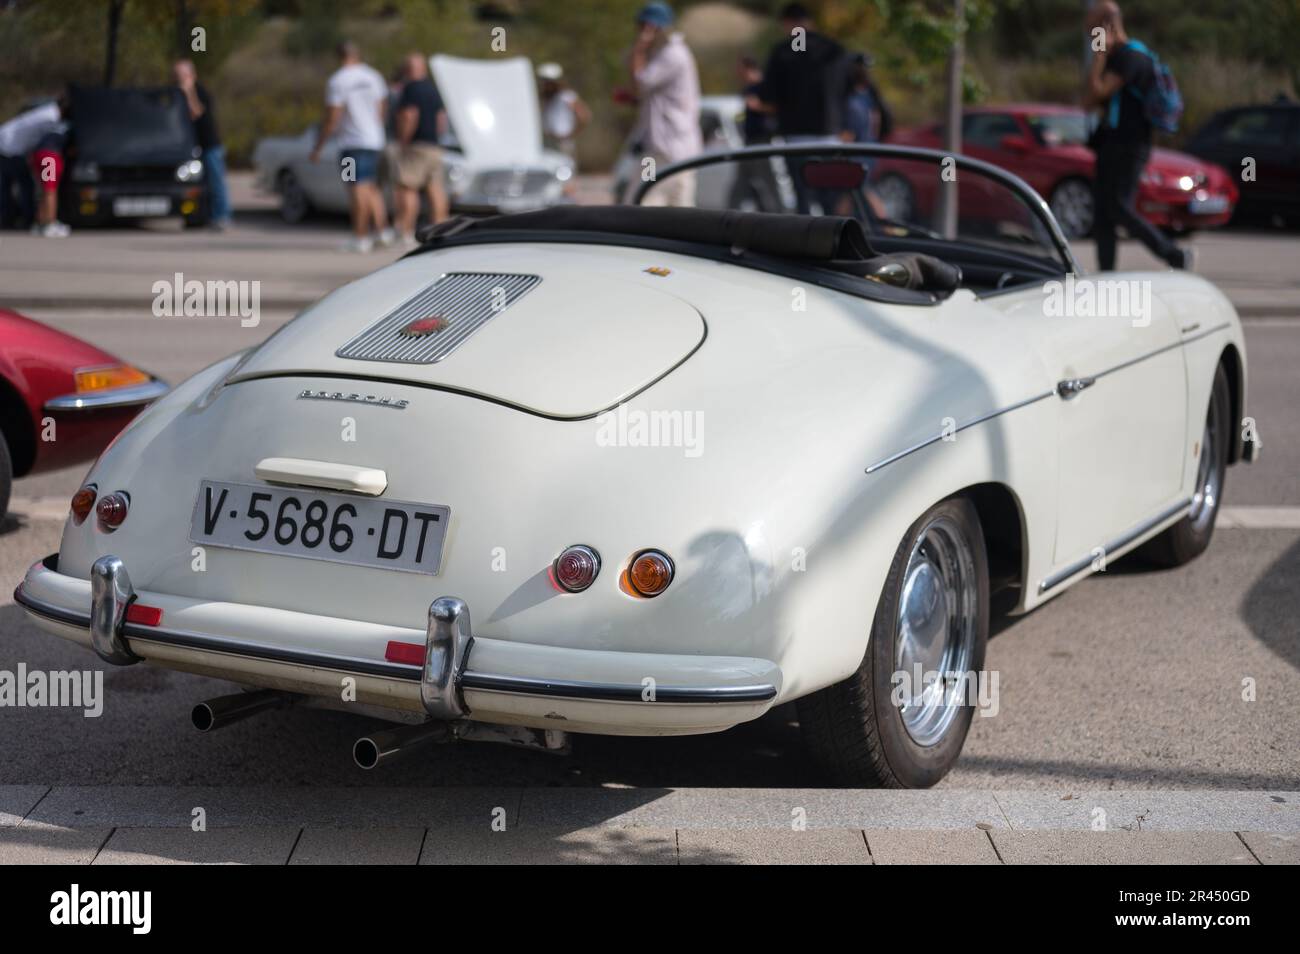 Rear view of the historic German sports car Posche 356 Stock Photo